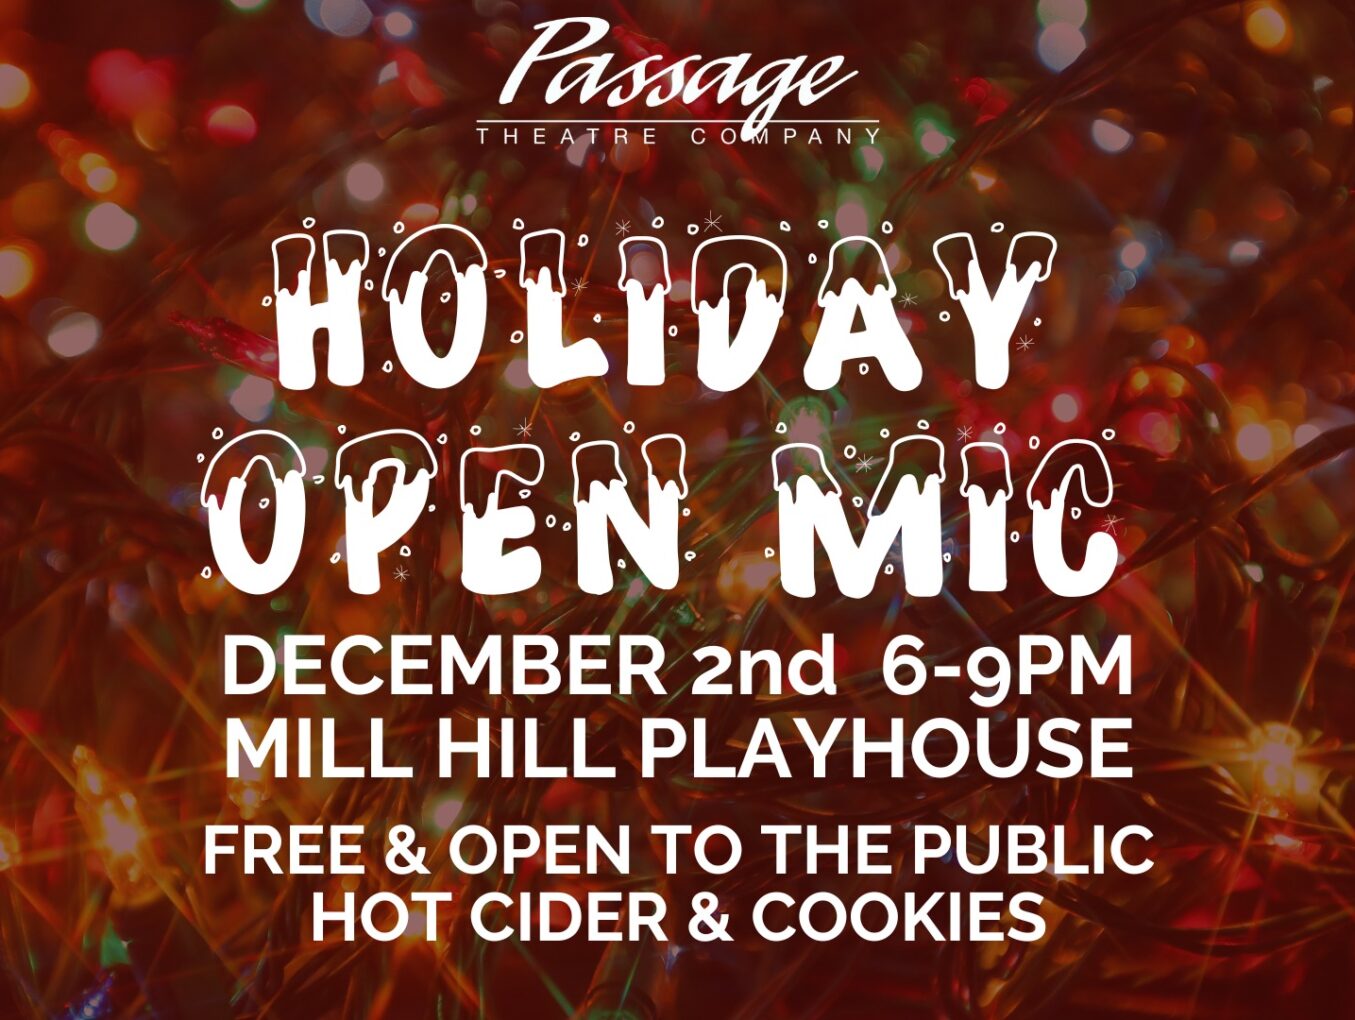 Holiday Open Mic Night Comes to Mill Hill Playhouse